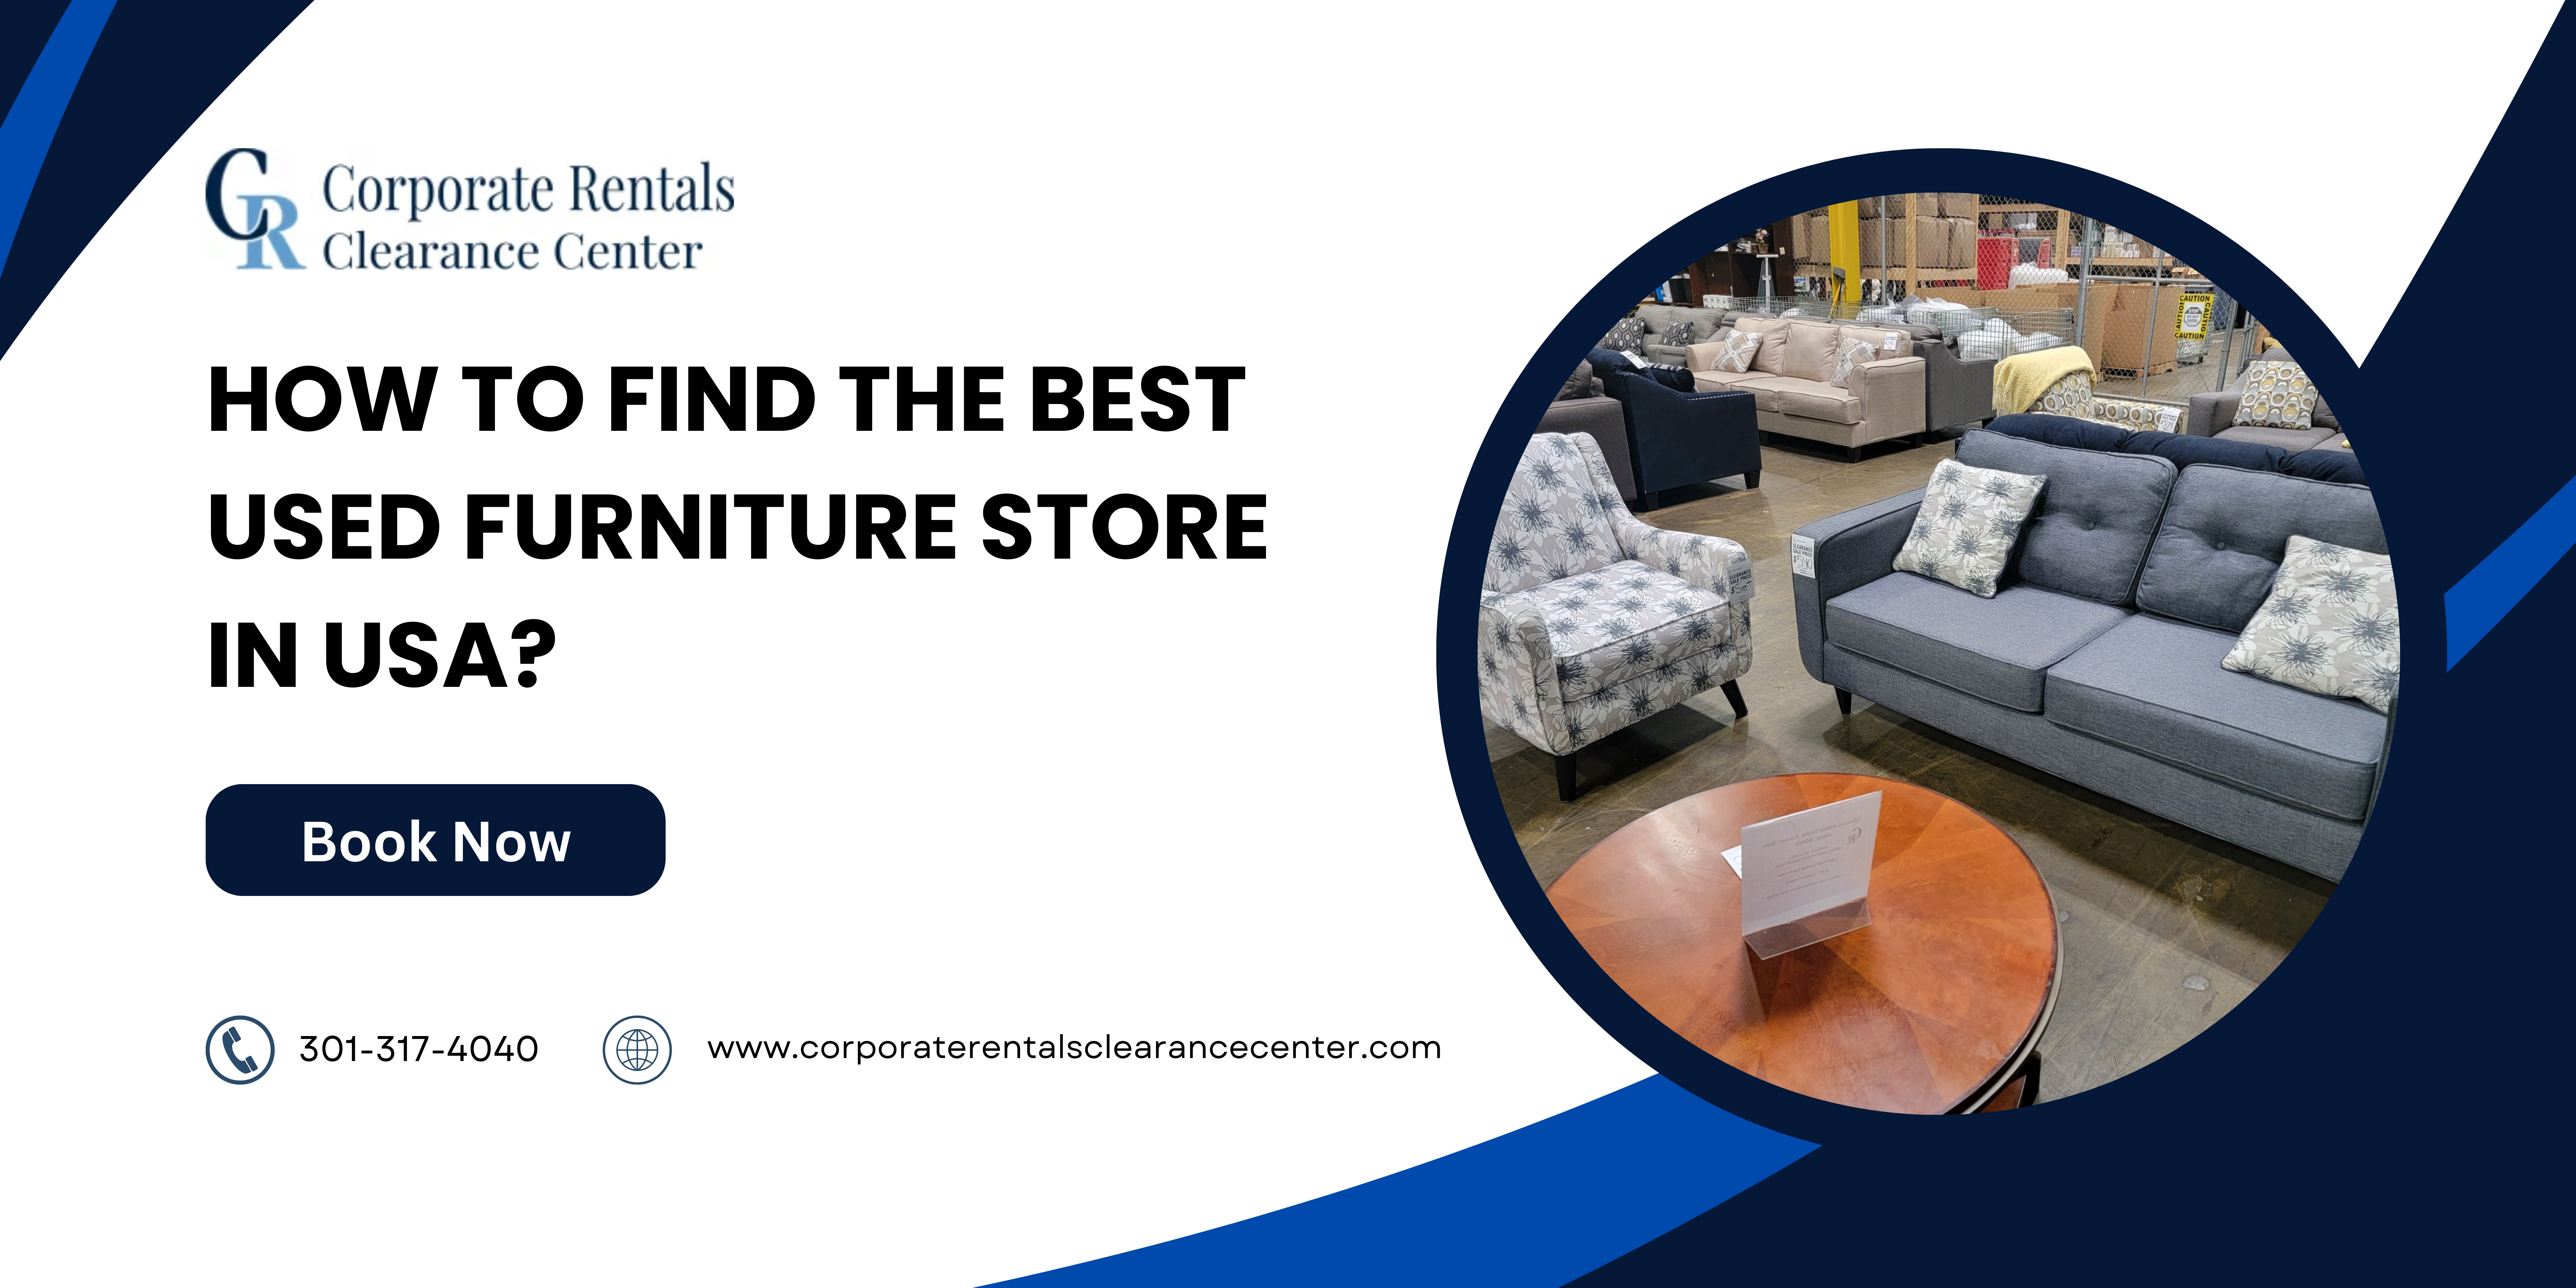 How to Find the Best Used Furniture Store In USA?